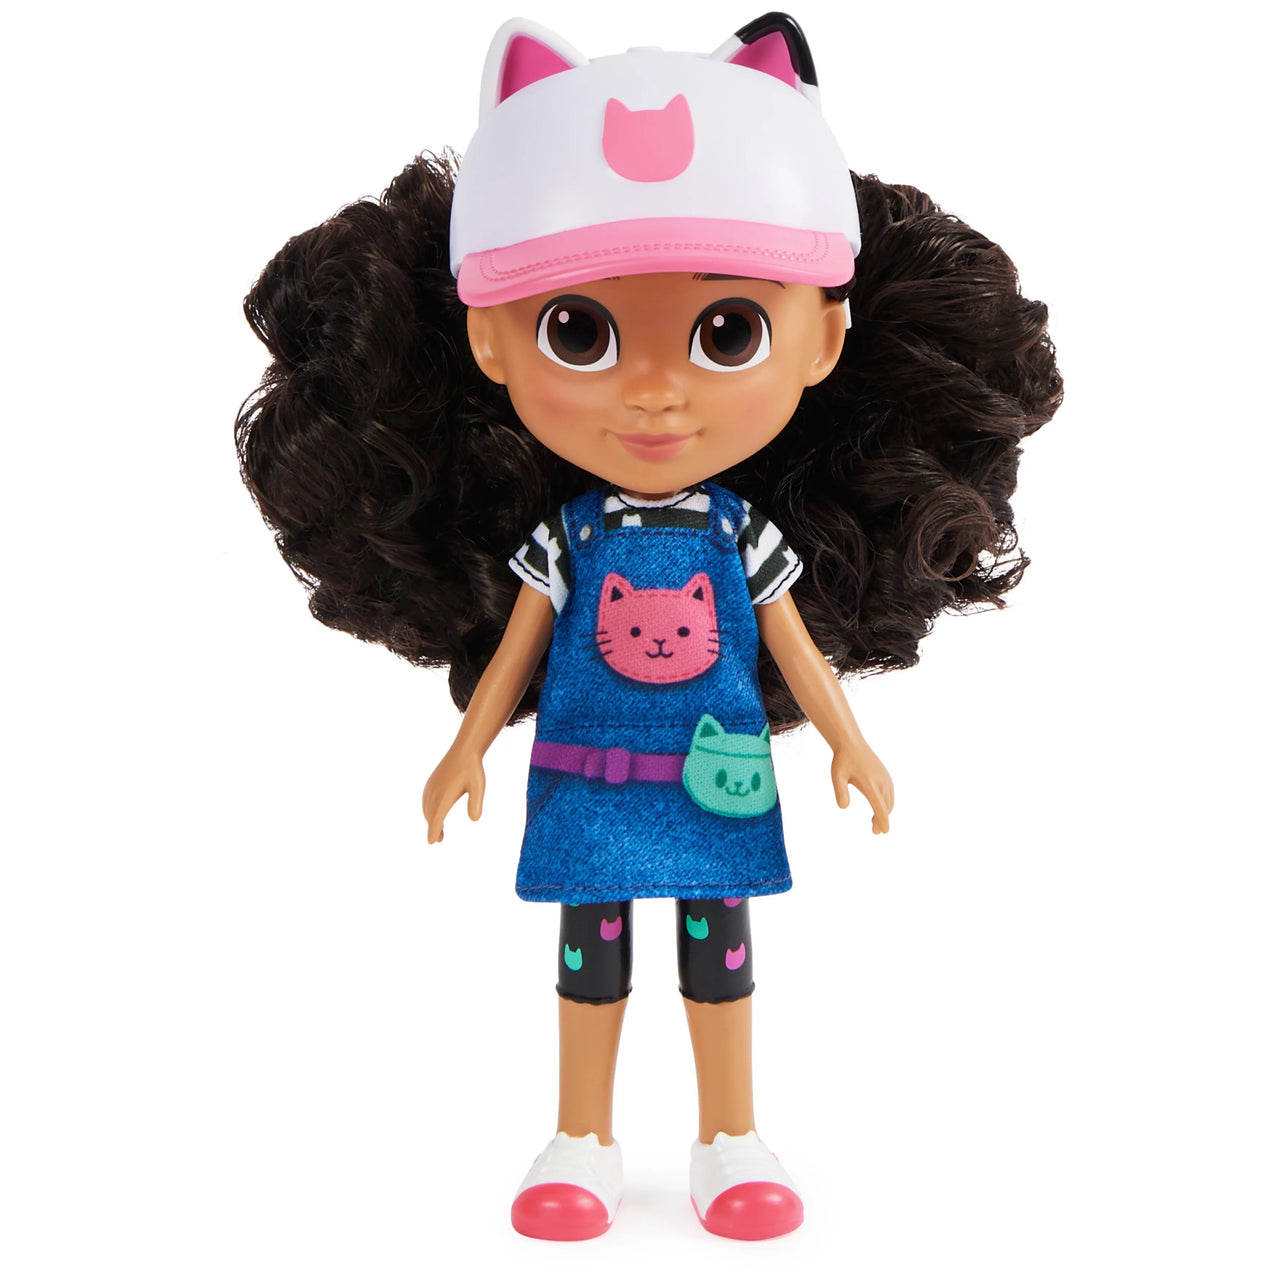 Gabby's Dollhouse 8-inch Gabby Girl Doll (Travel Edition) with Accessories Master Kids Company Pretend Toys 